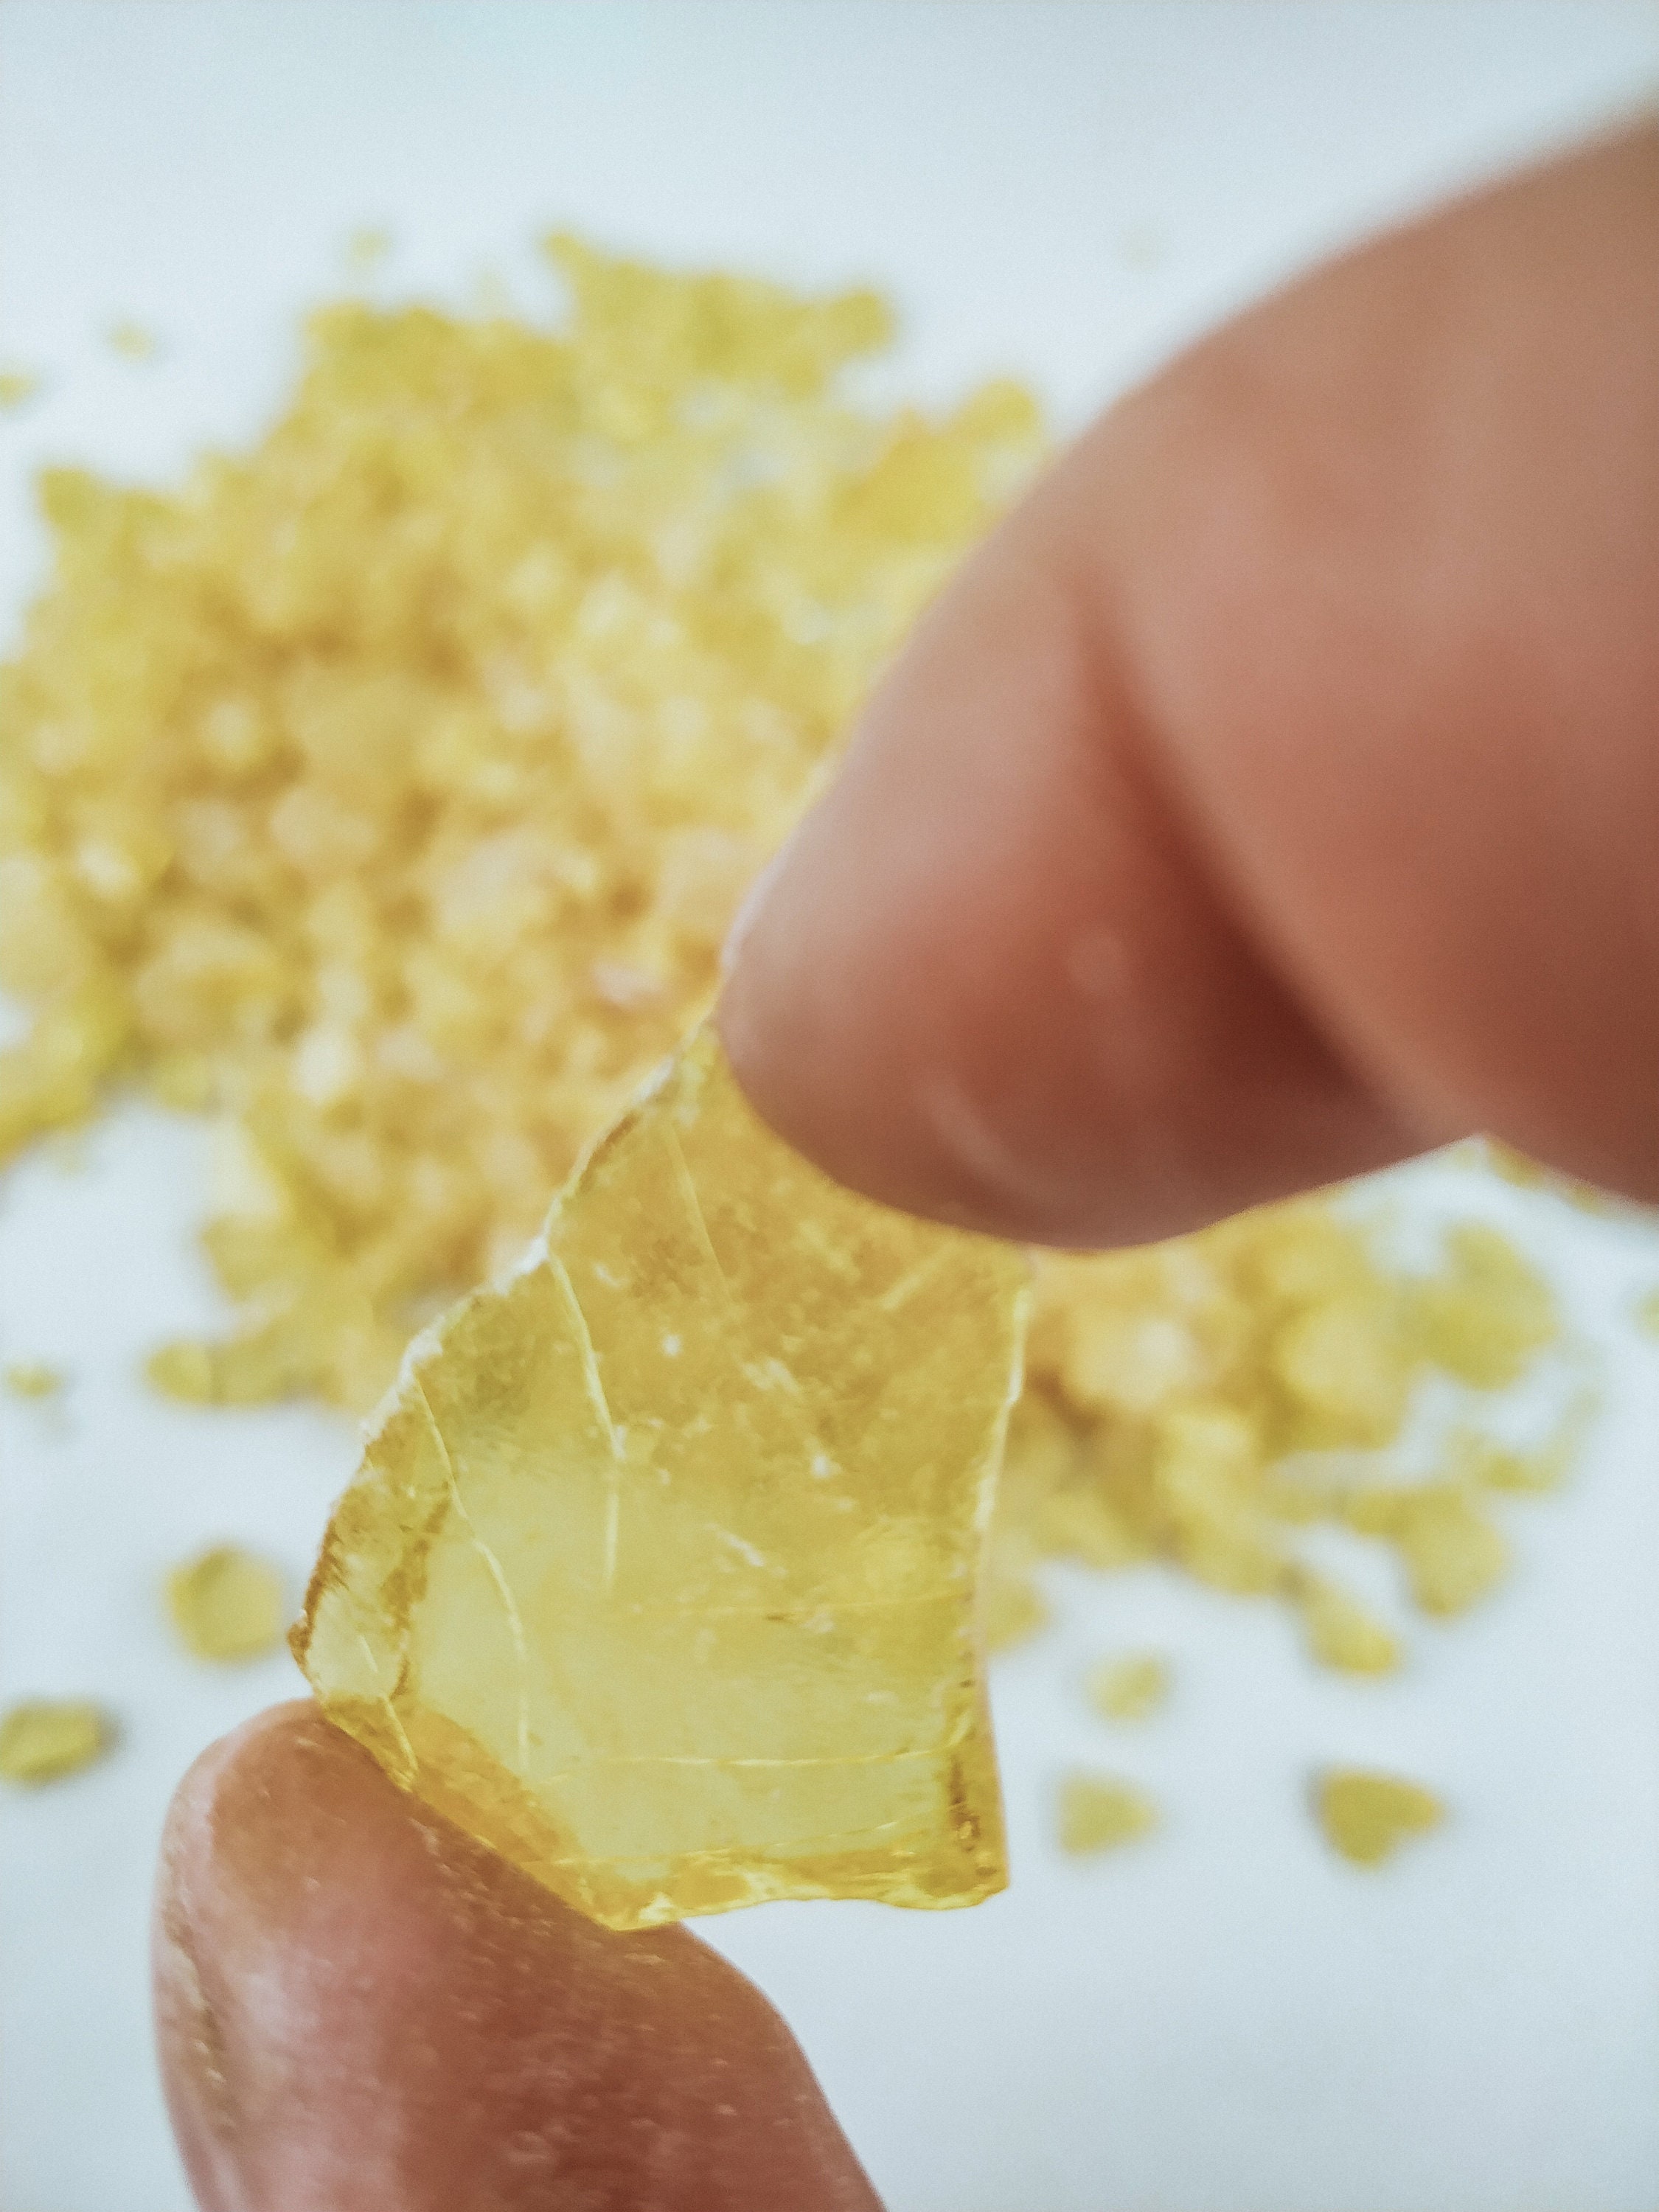 Pine Resin (Rosin or Colophony) - 10g – Witch Chest